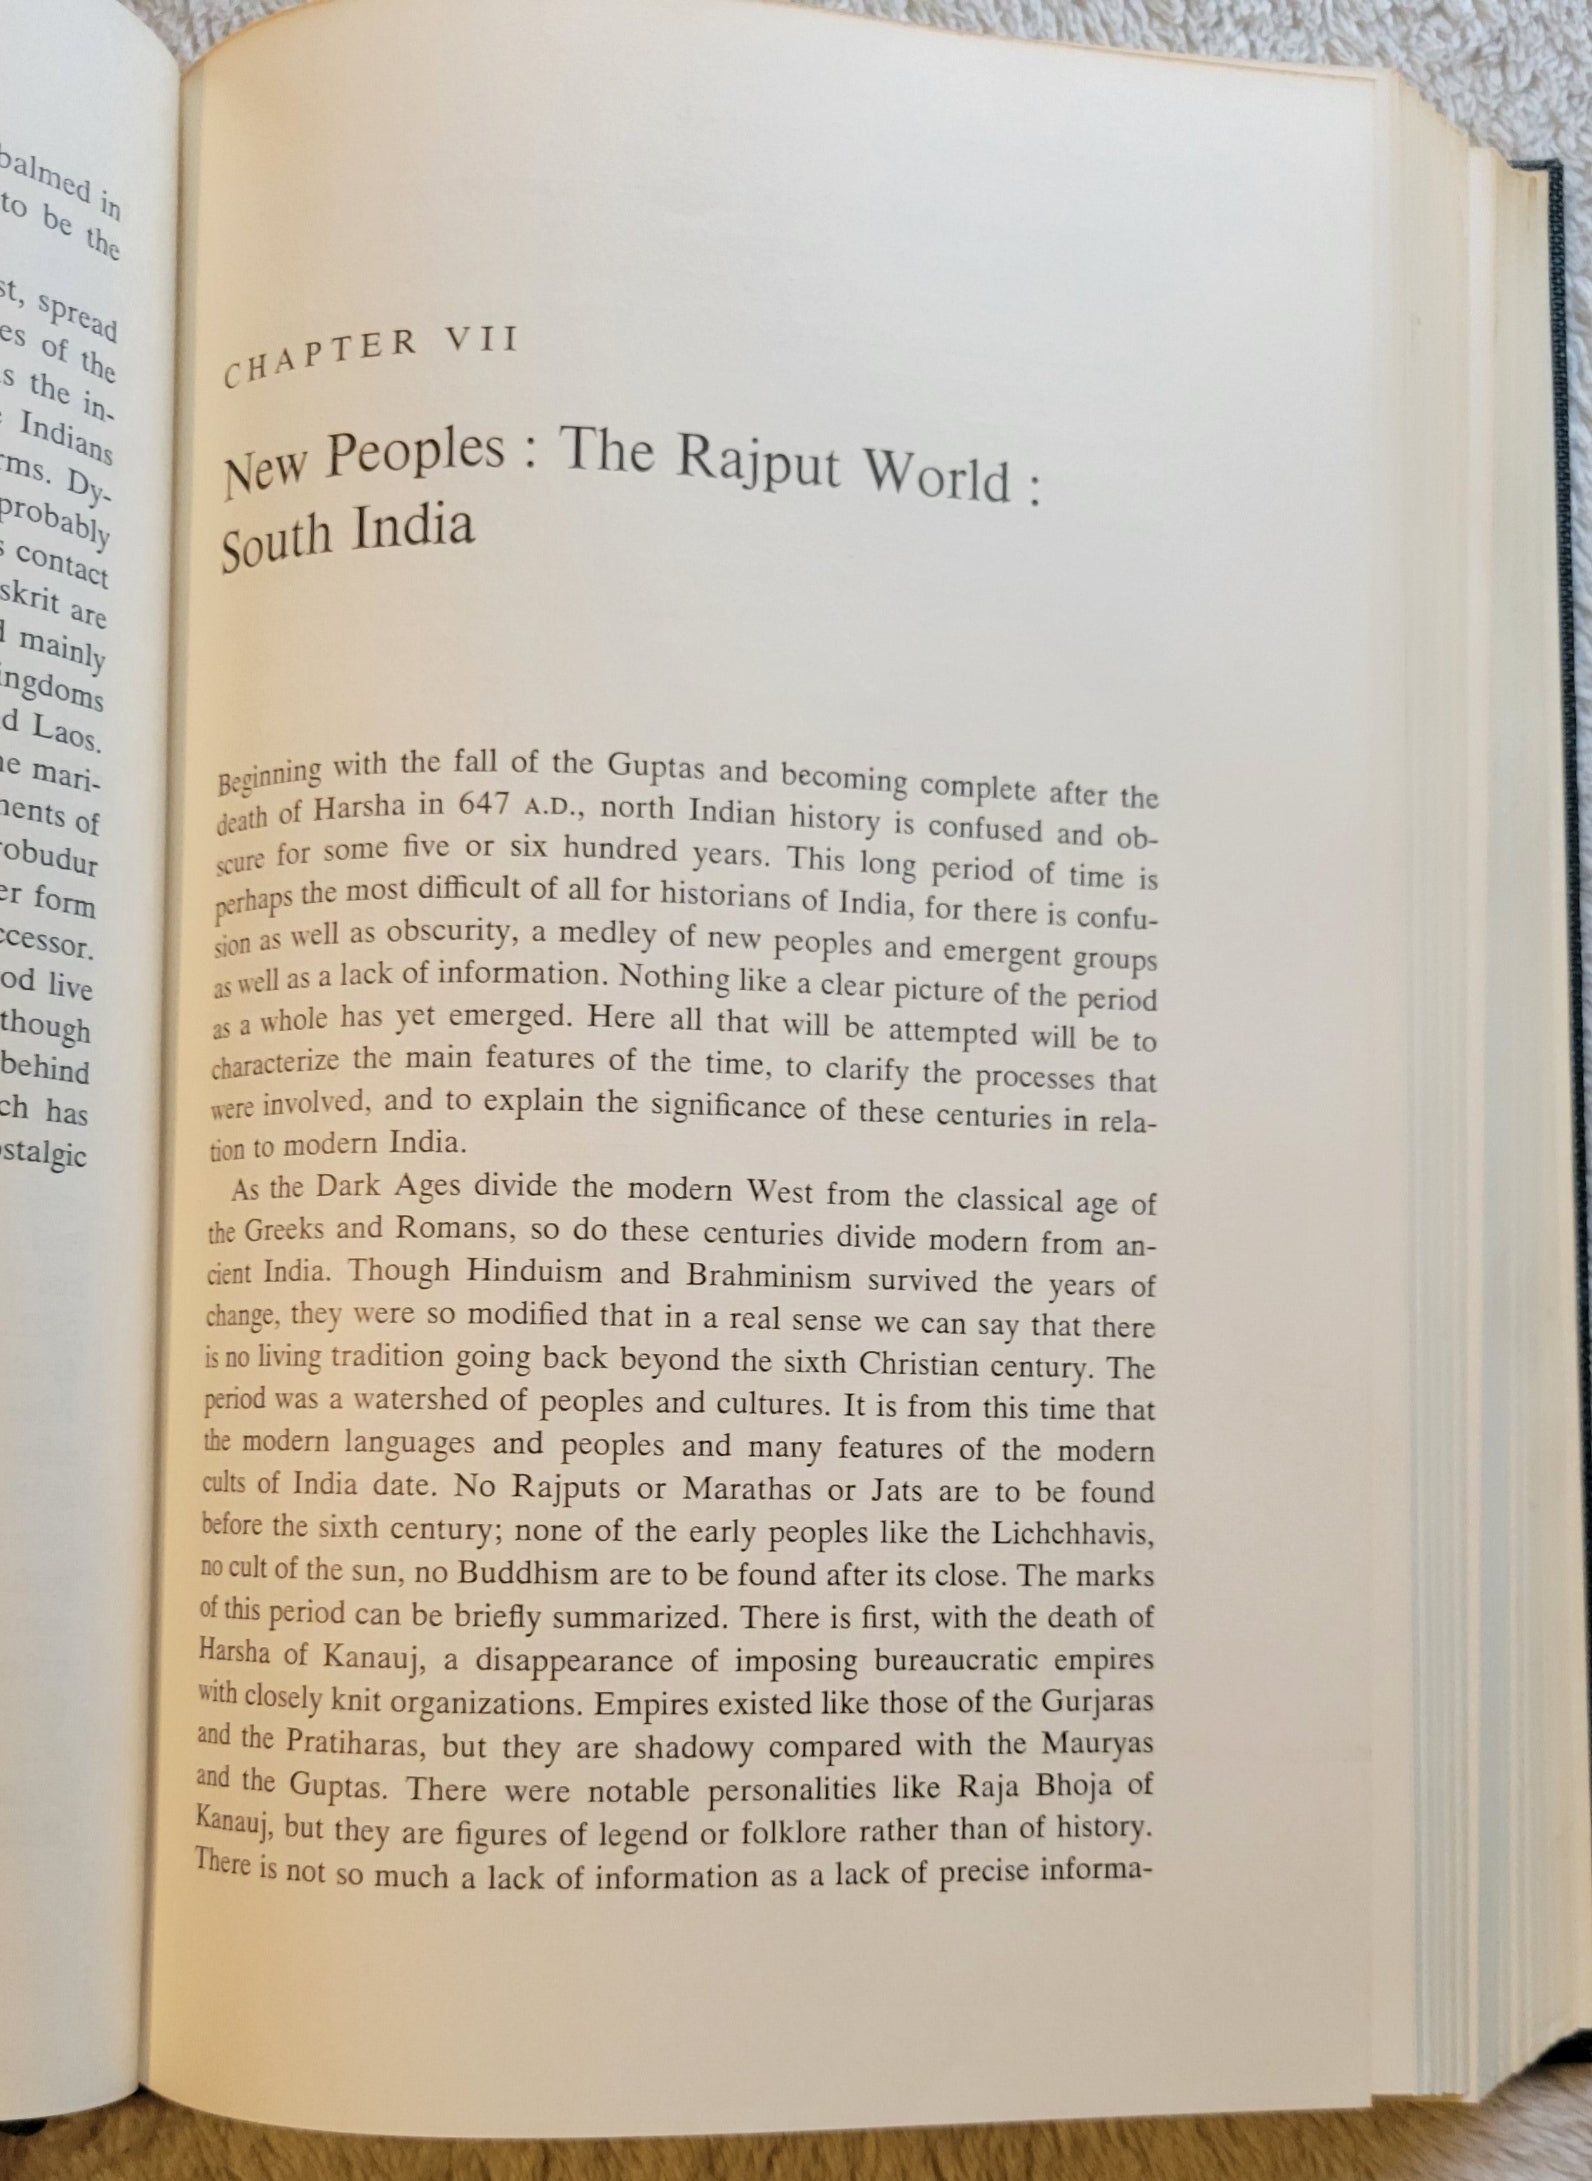 Used book for sale "India: A Modern History" by Percival Spear, published by Ann Arbor: The University of Michigan Press, 1961. This book is a volume in The University of Michigane History of the Modern World. View of chapter 7.